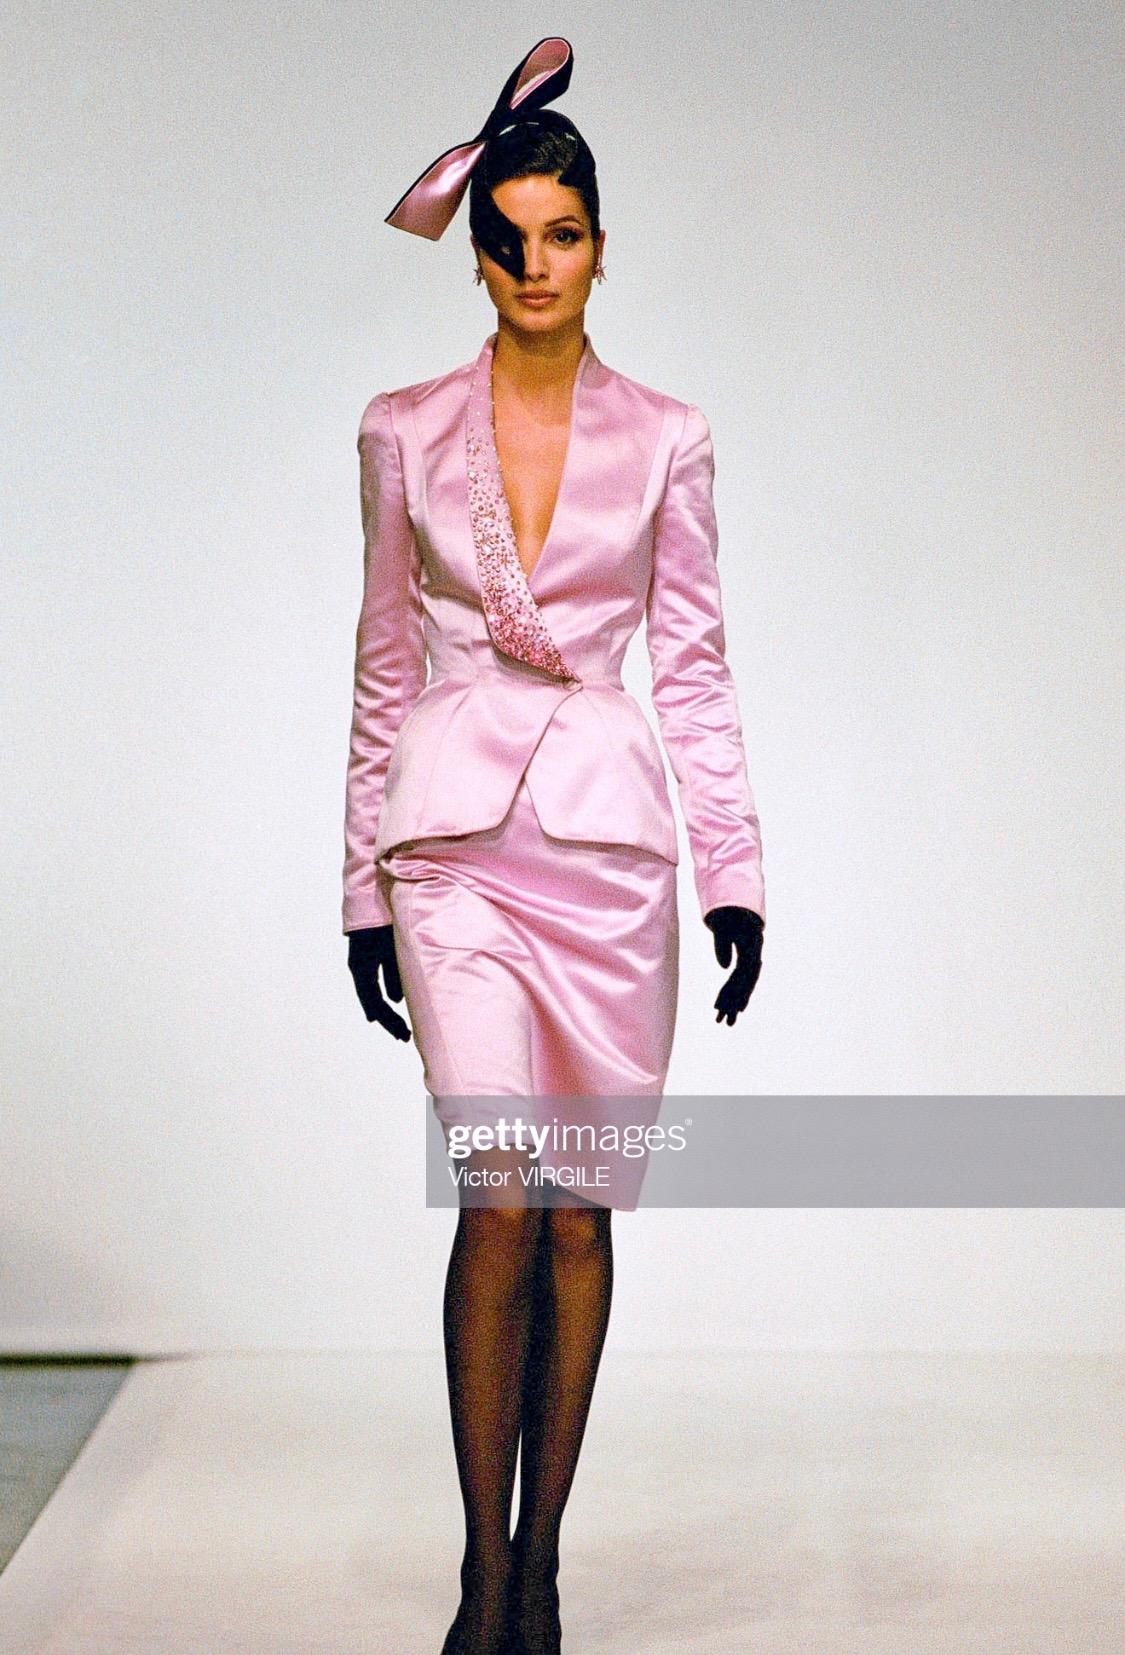 TheRealList presents: a black wool pantsuit designed by Thierry Mugler for his Fall/Winter 1999 collection. The right lapel is covered in pink and white rhinestones to create an elegant gradient effect. Unlike the pink variation of this jacket shown